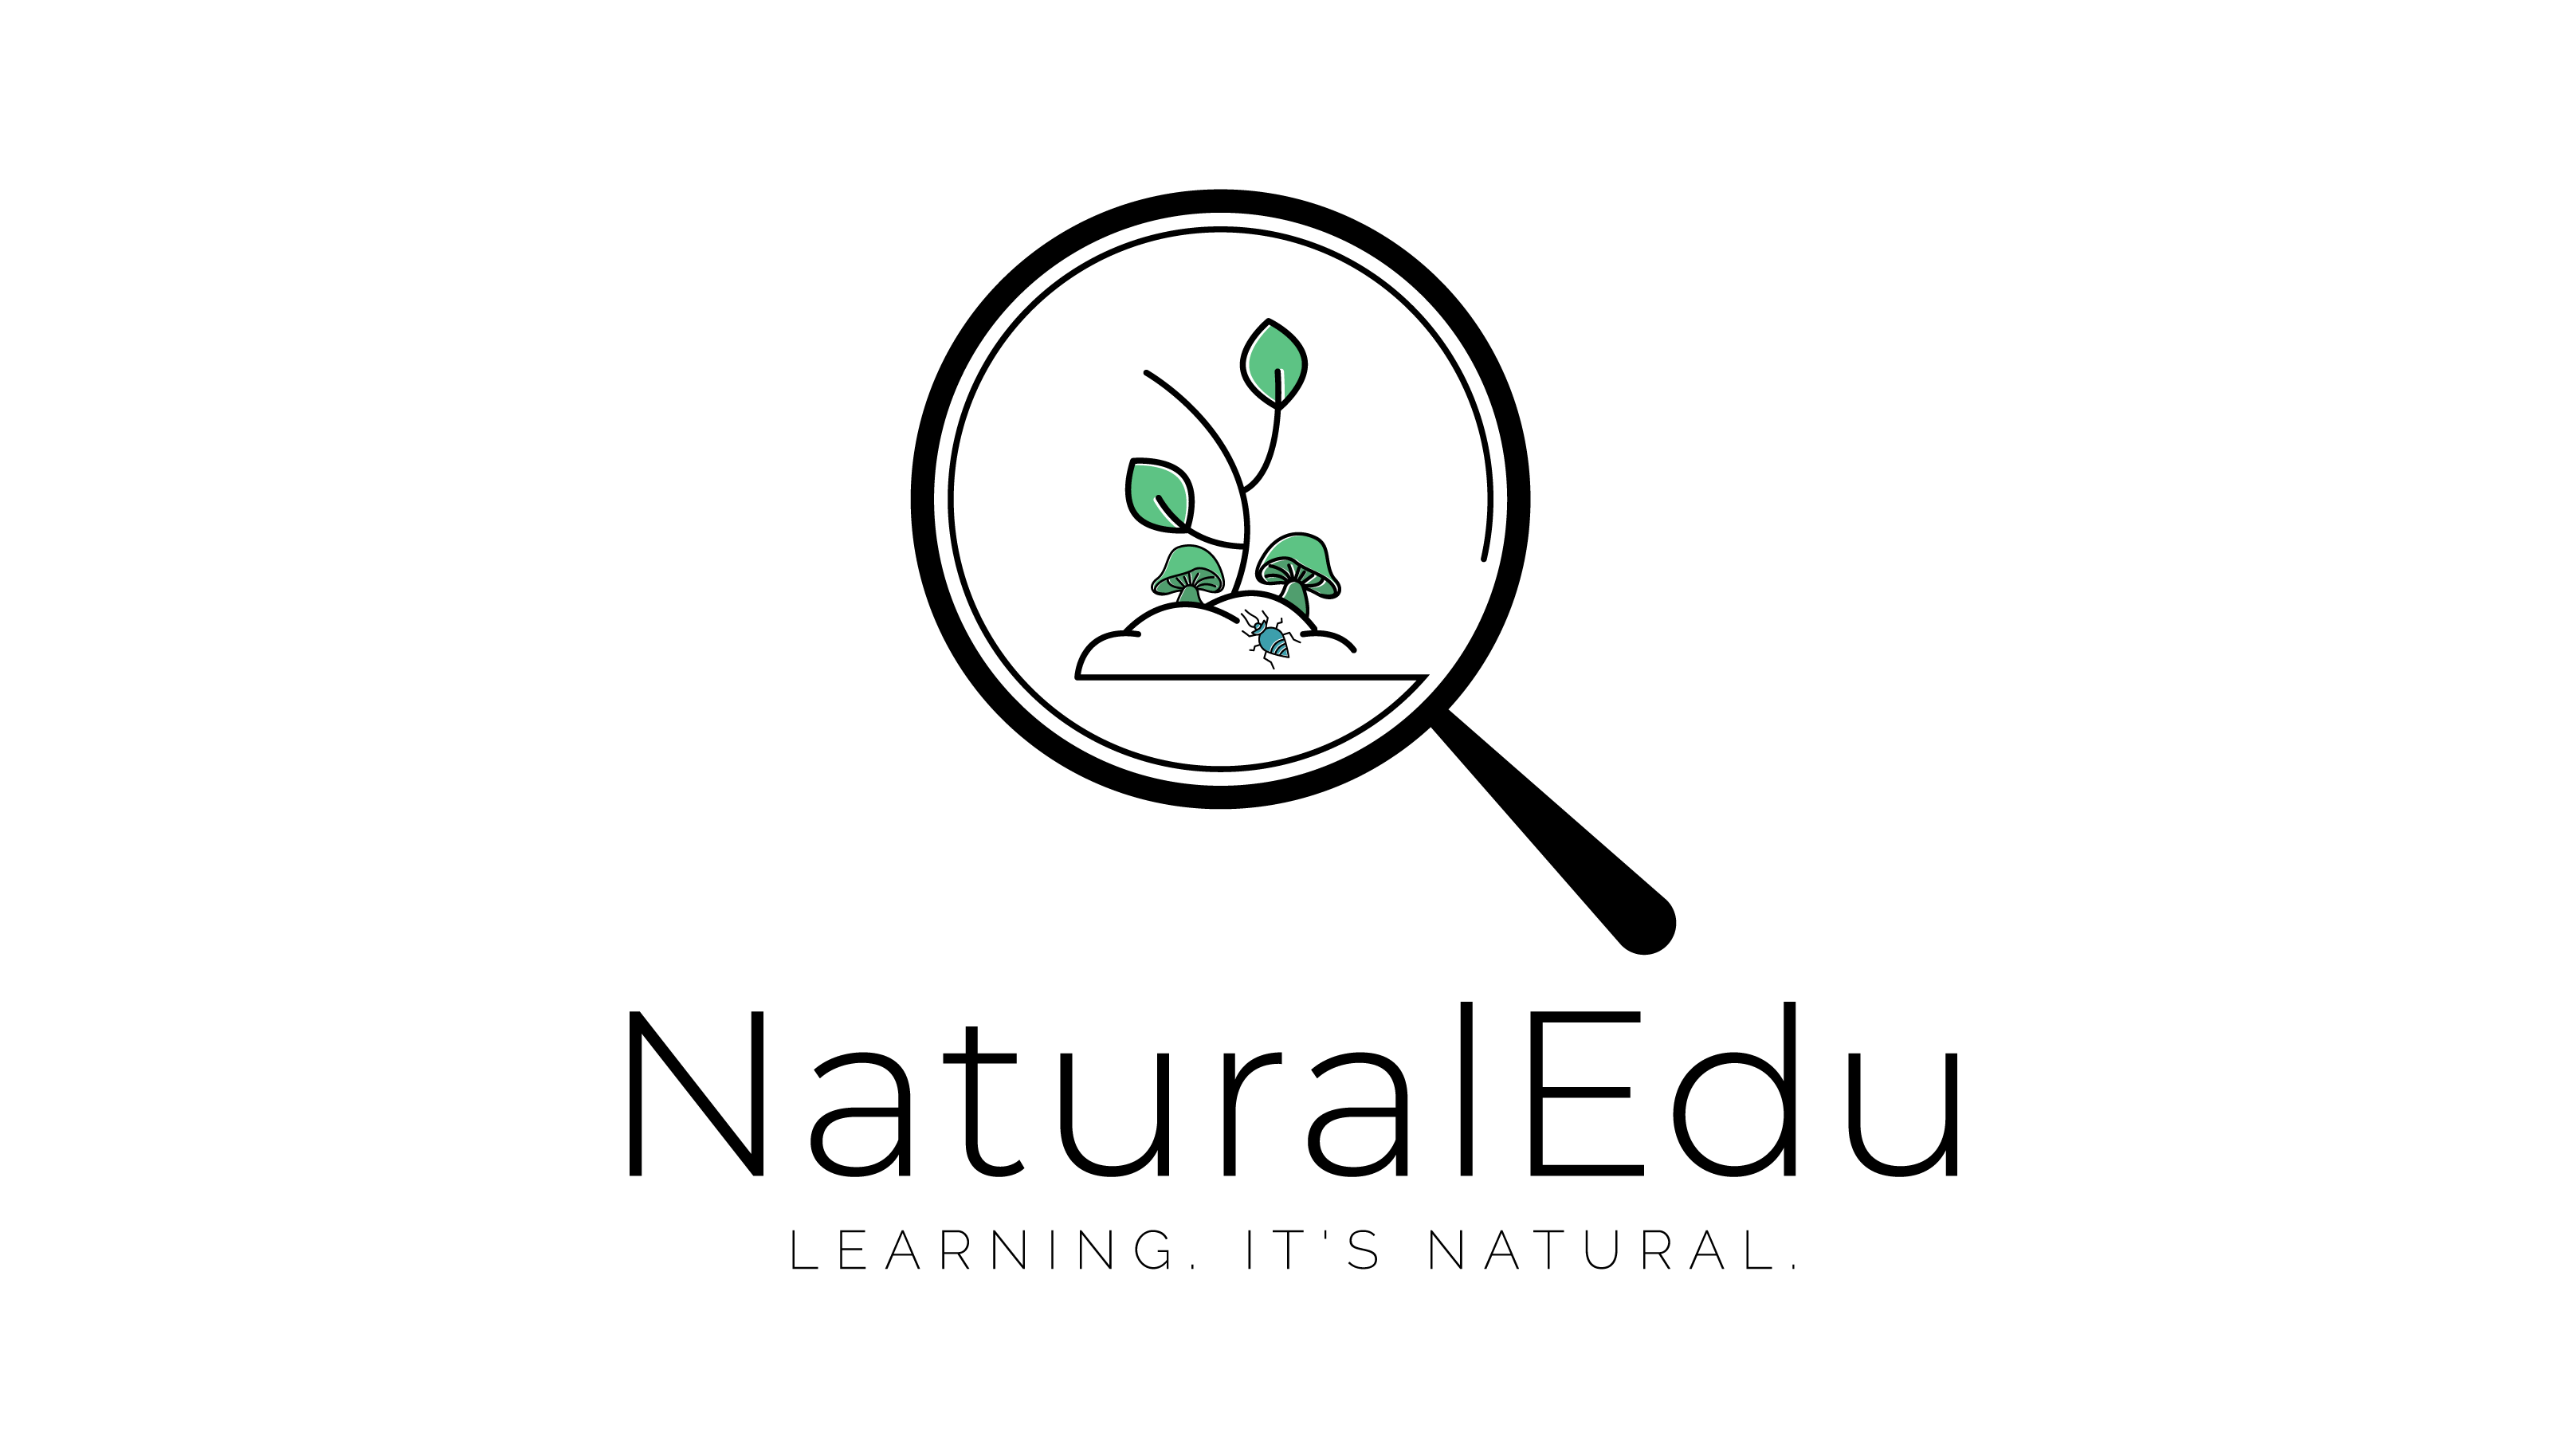 Educate and Inspire - Natural Learning Enterprises